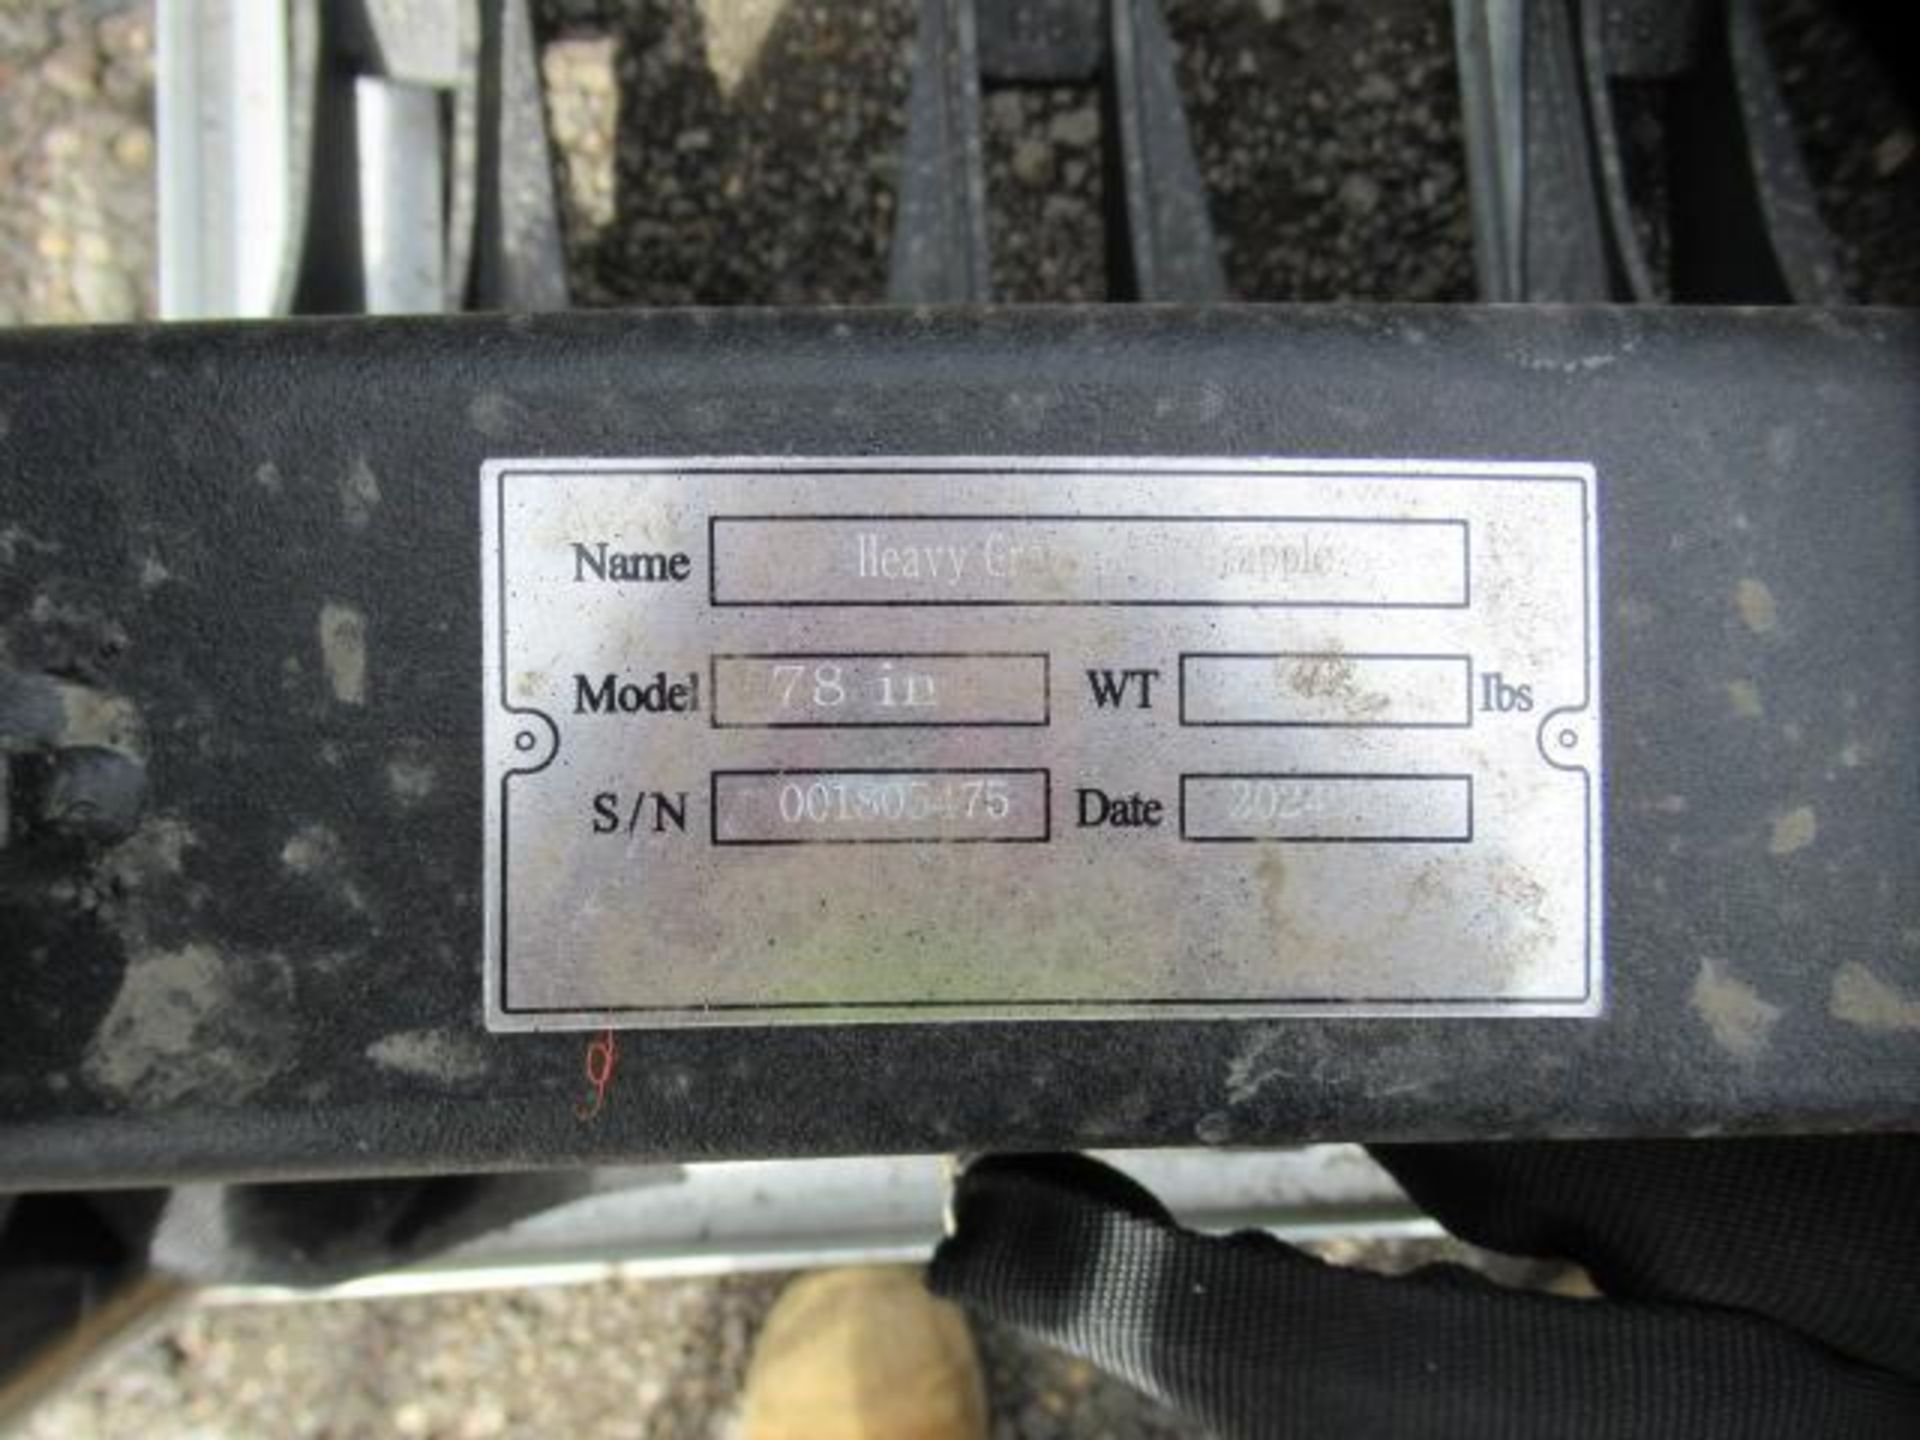 GREATBEAR 78'' SKID STEER HEAVY GRASS FORK GRAPPLE ATTACHMENT W/ HYDRAULIC FITTINGS (UNUSED) - Image 5 of 5